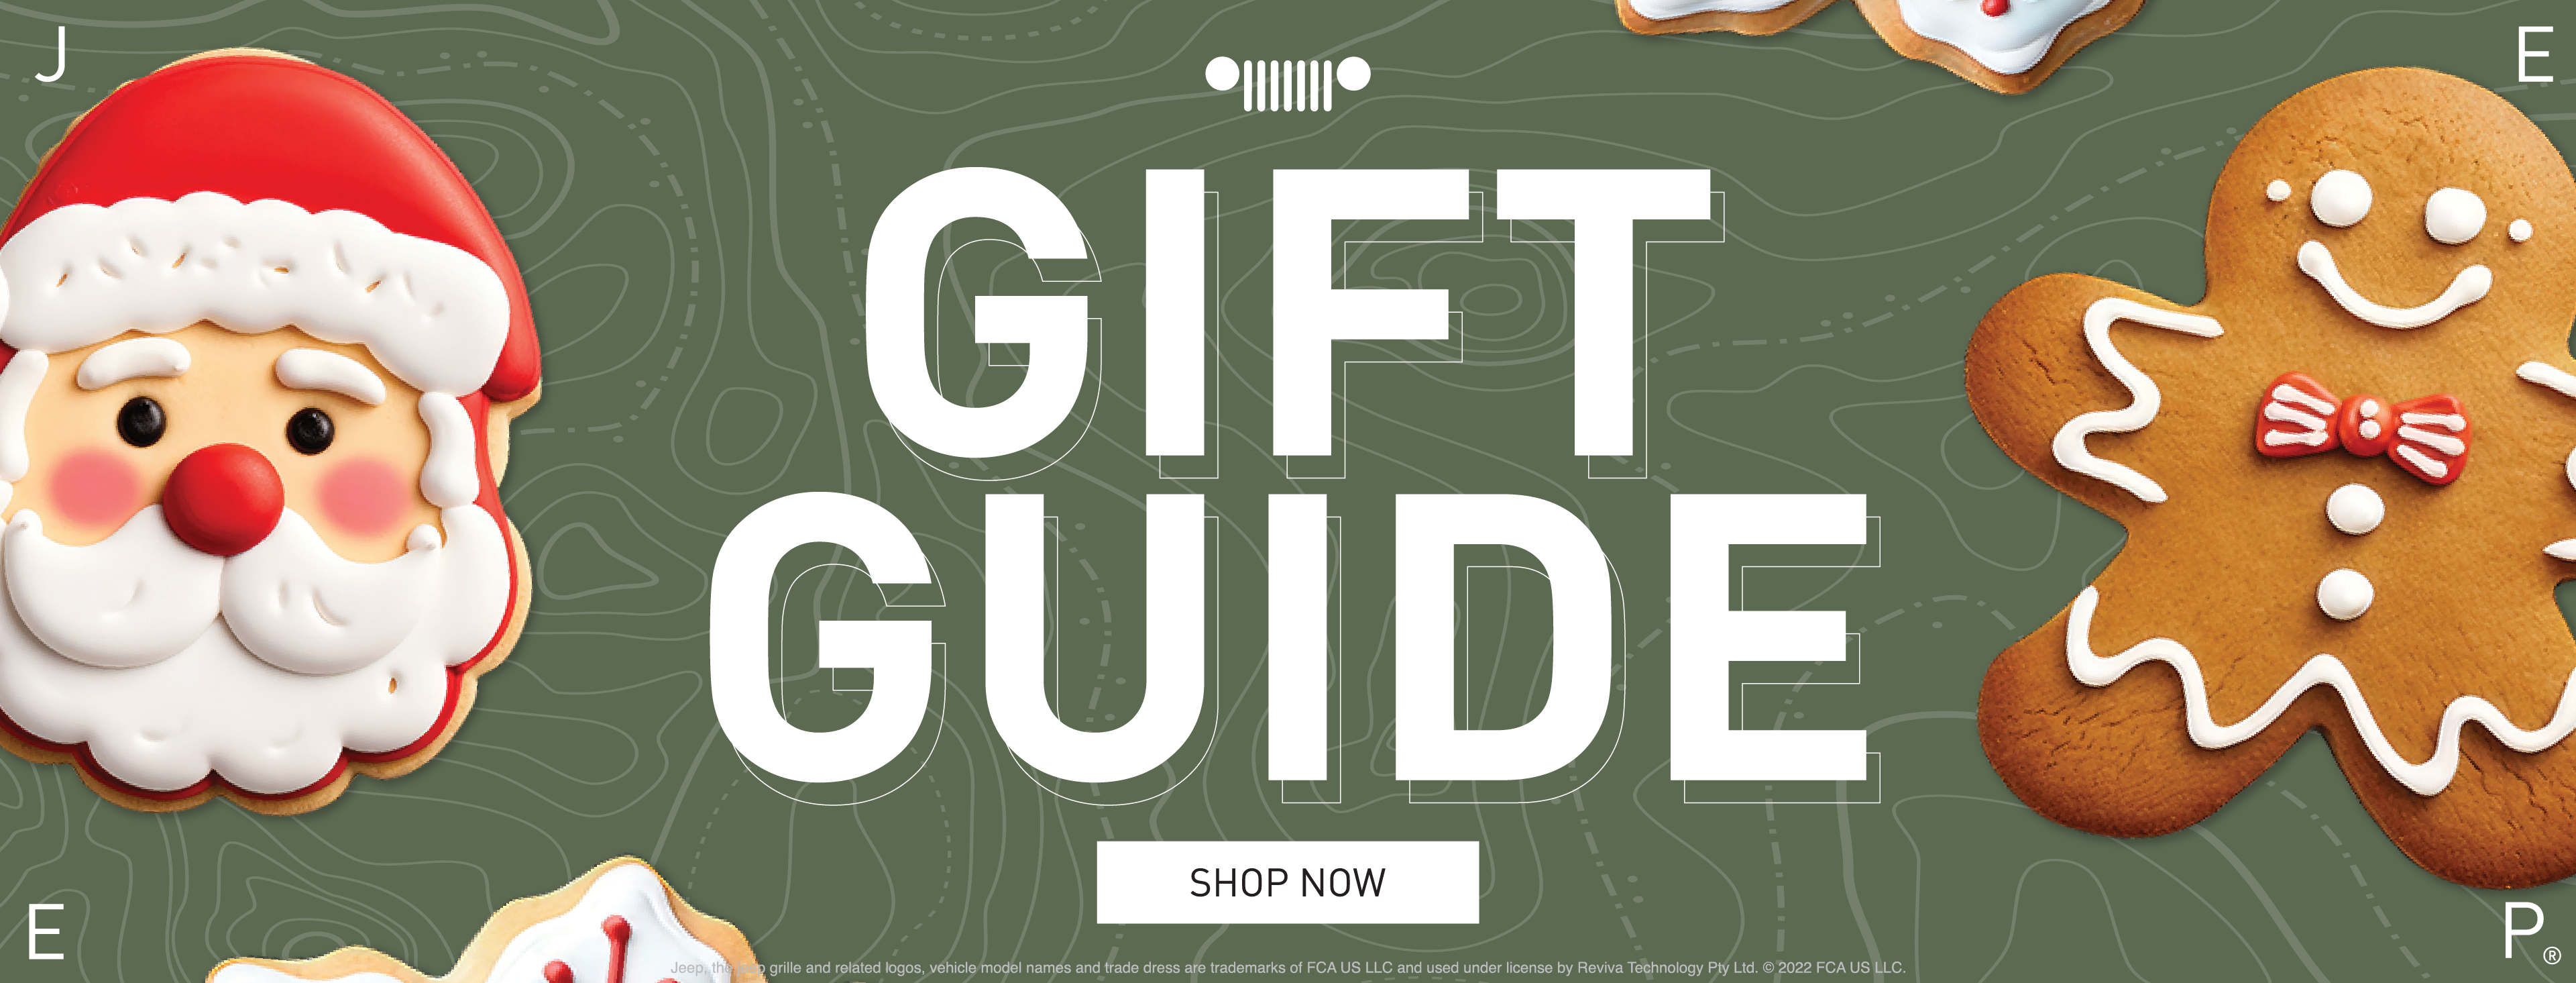 1920X732_-_GIFT_GUIDE_(1)